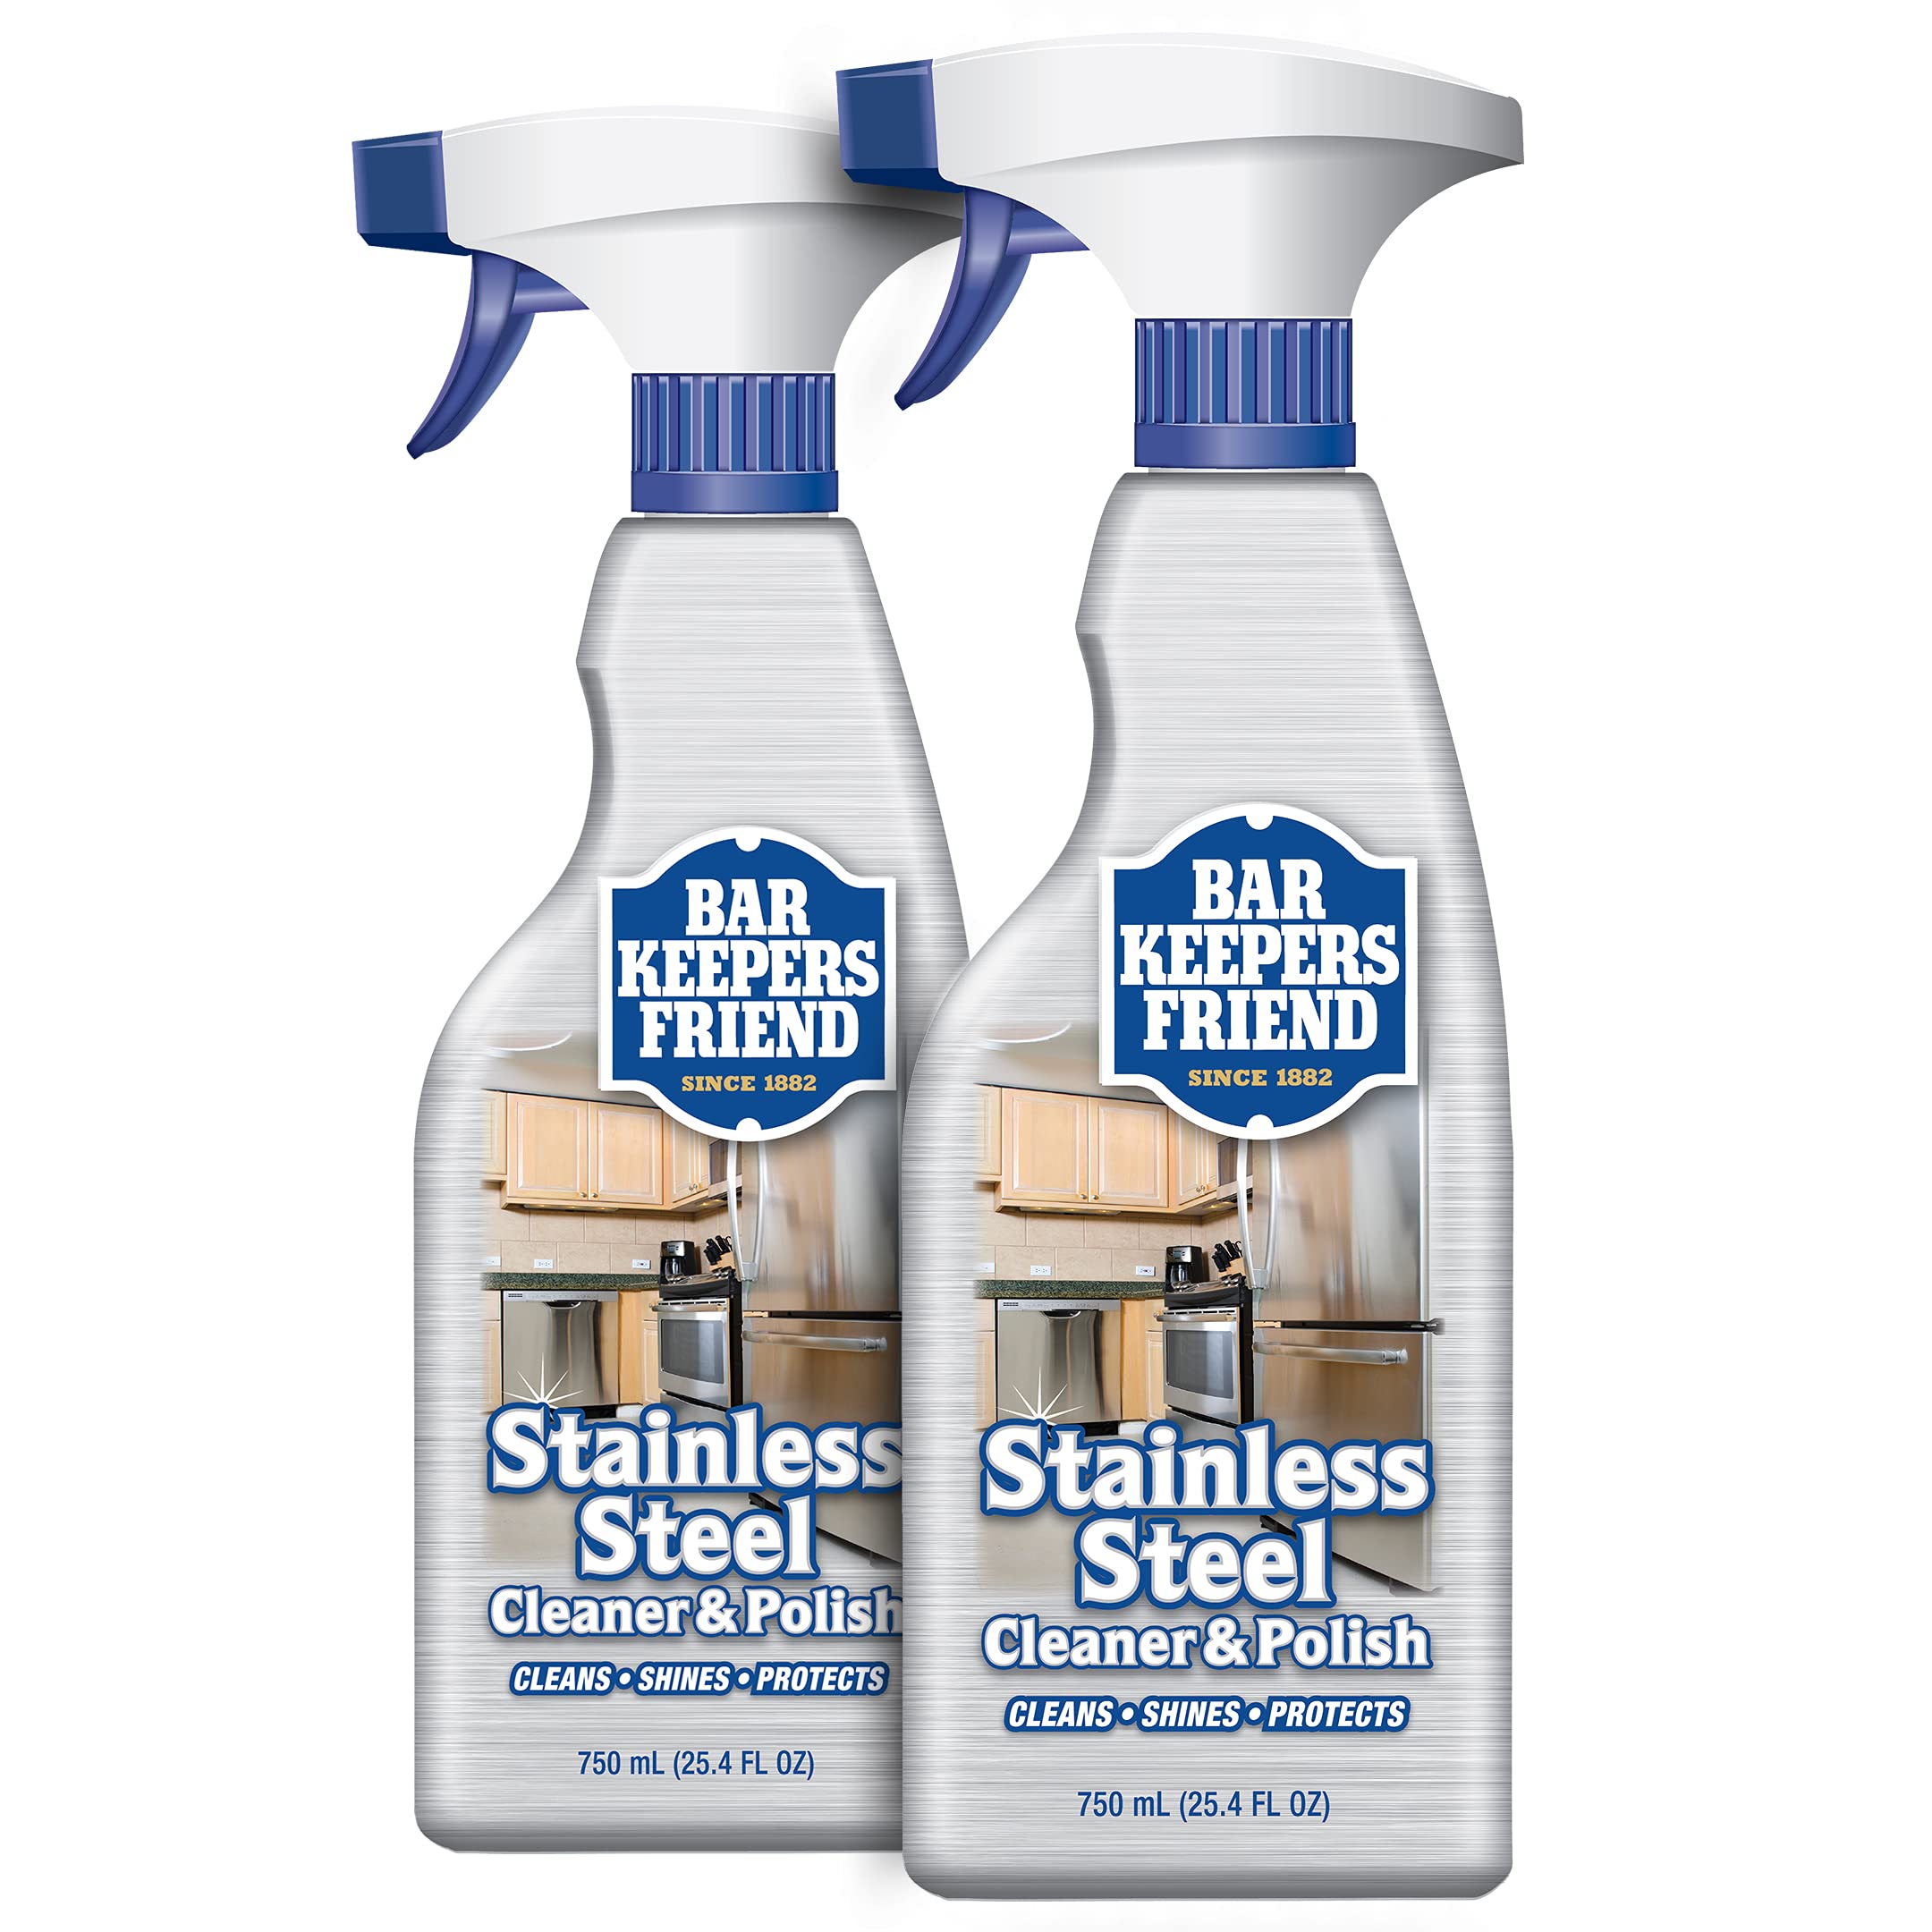 Bar Keepers Friend Spray and Foam Cleaner, Cleaning Wipes